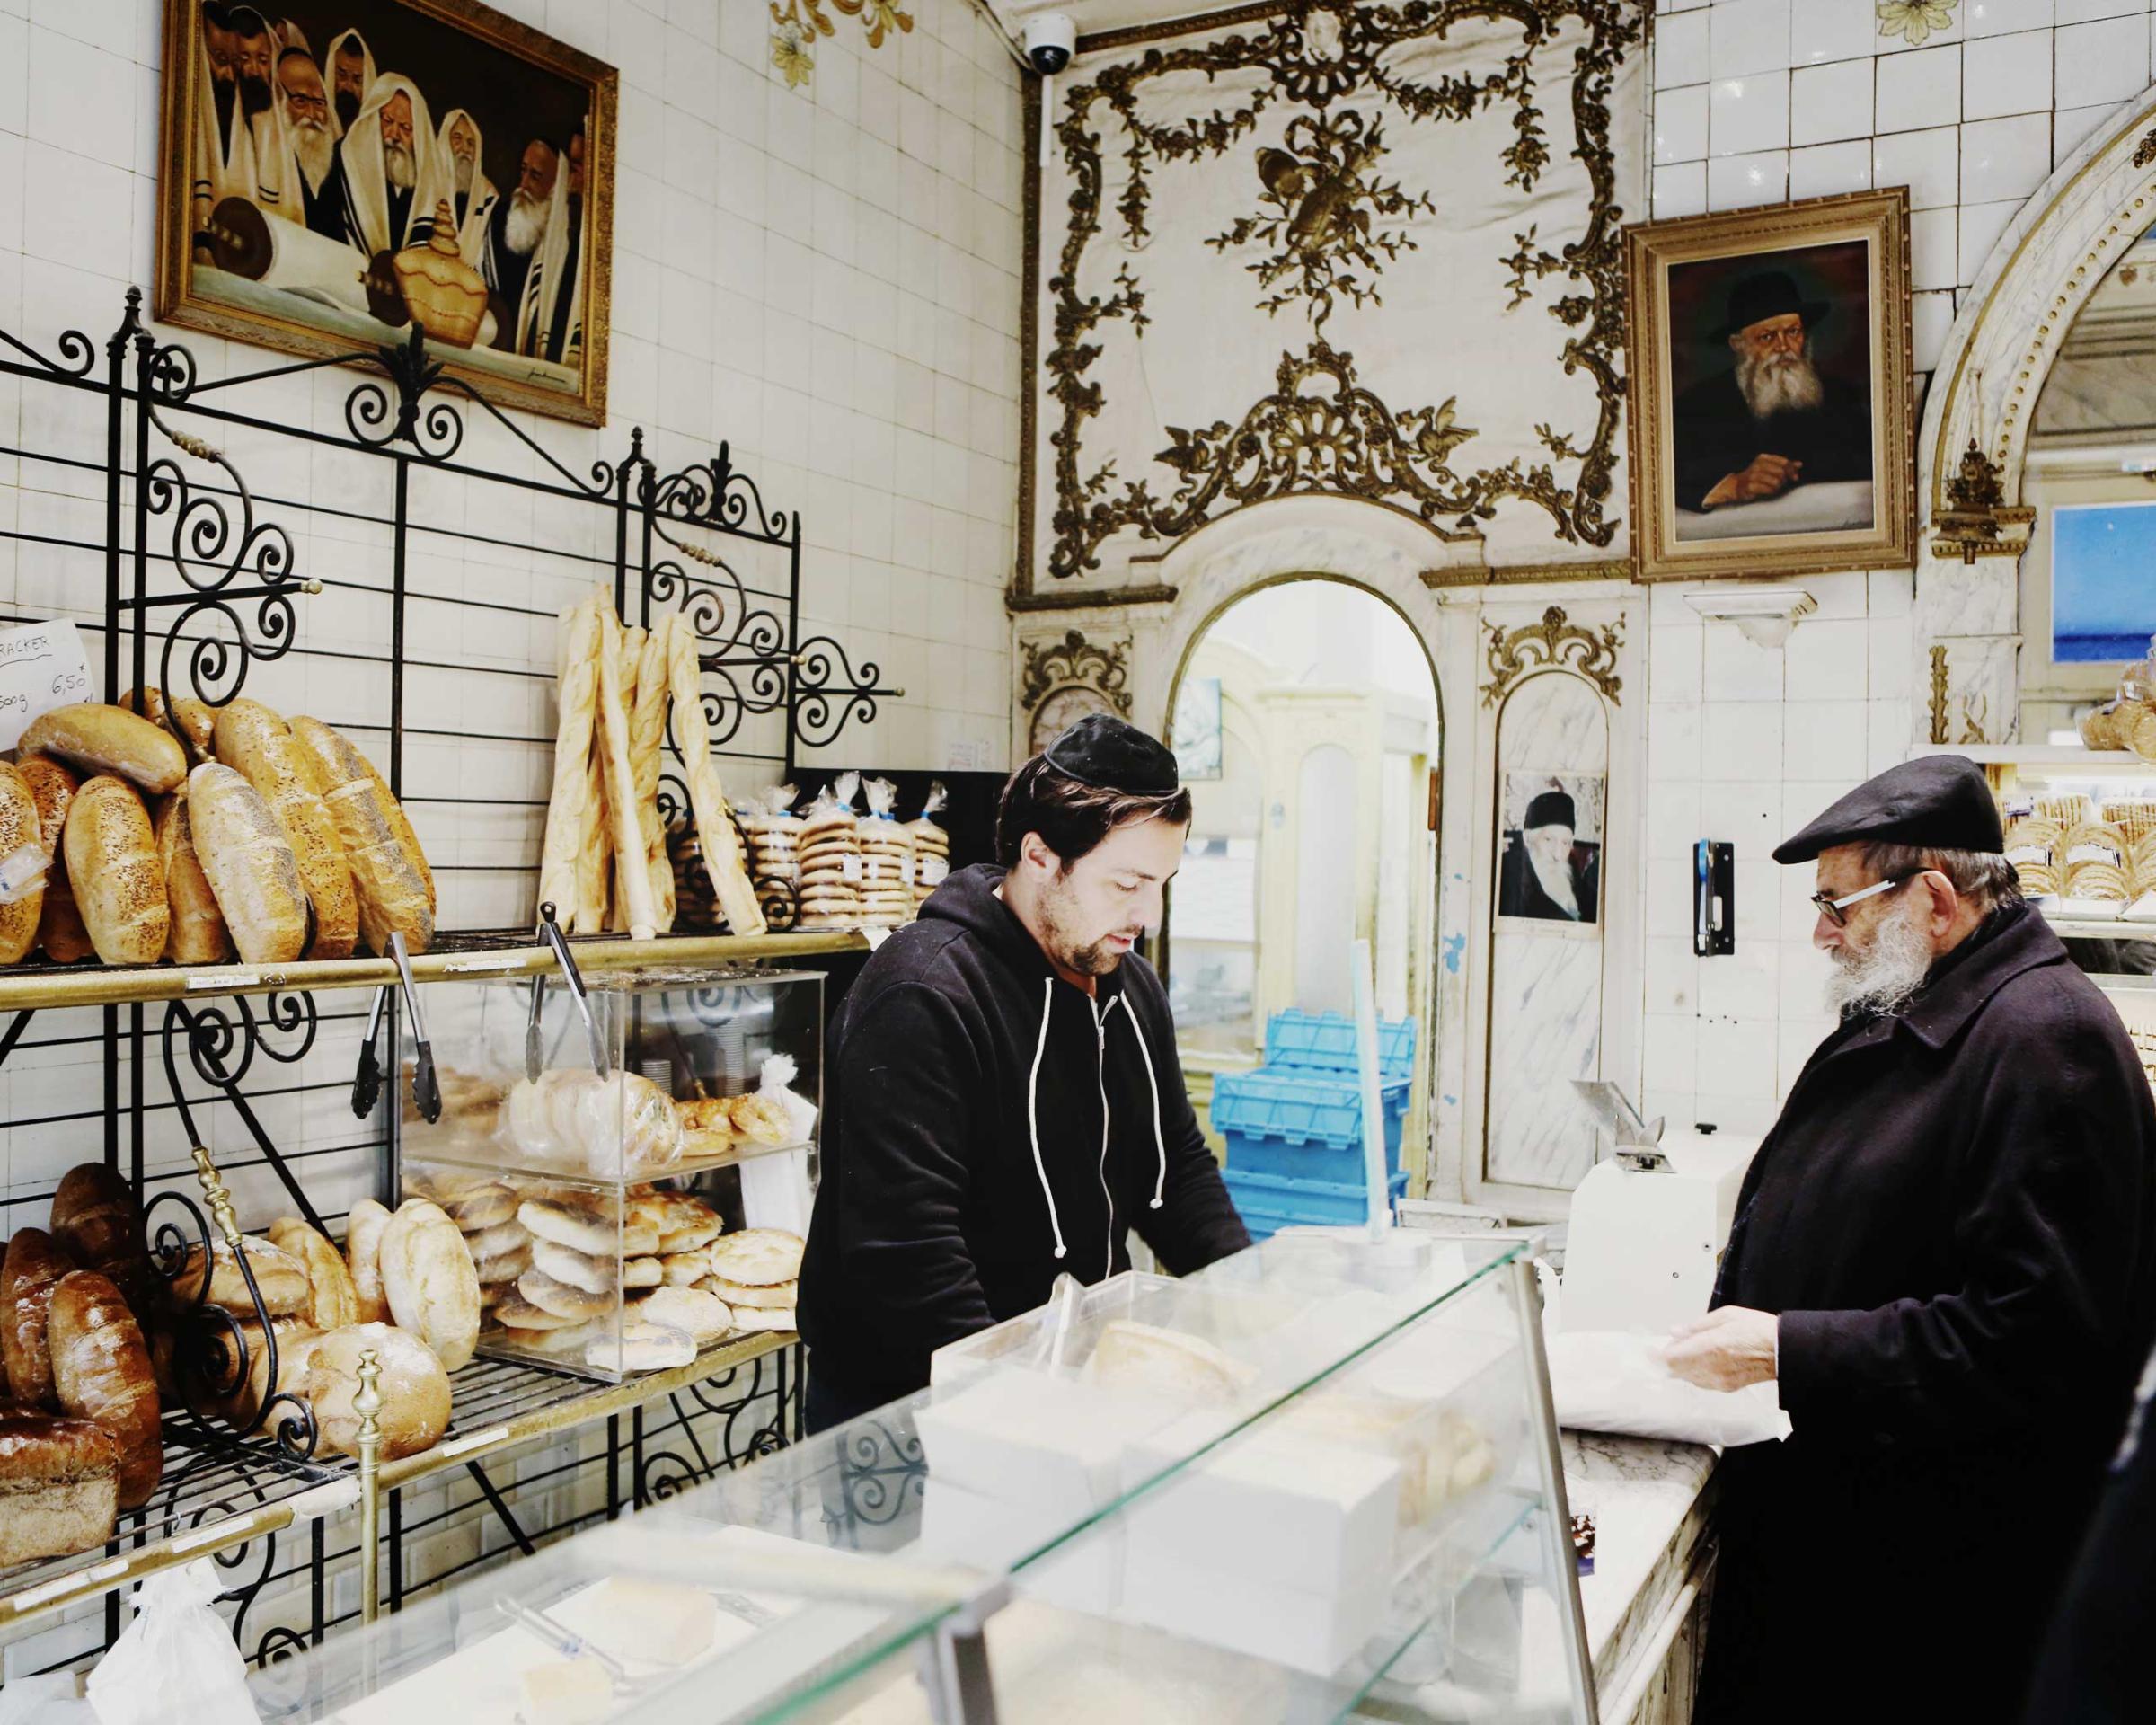 Life goes on at this Jewish bakery in the Marais, a traditionally Jewish quarter in Paris, France, Jan. 11, 2015.